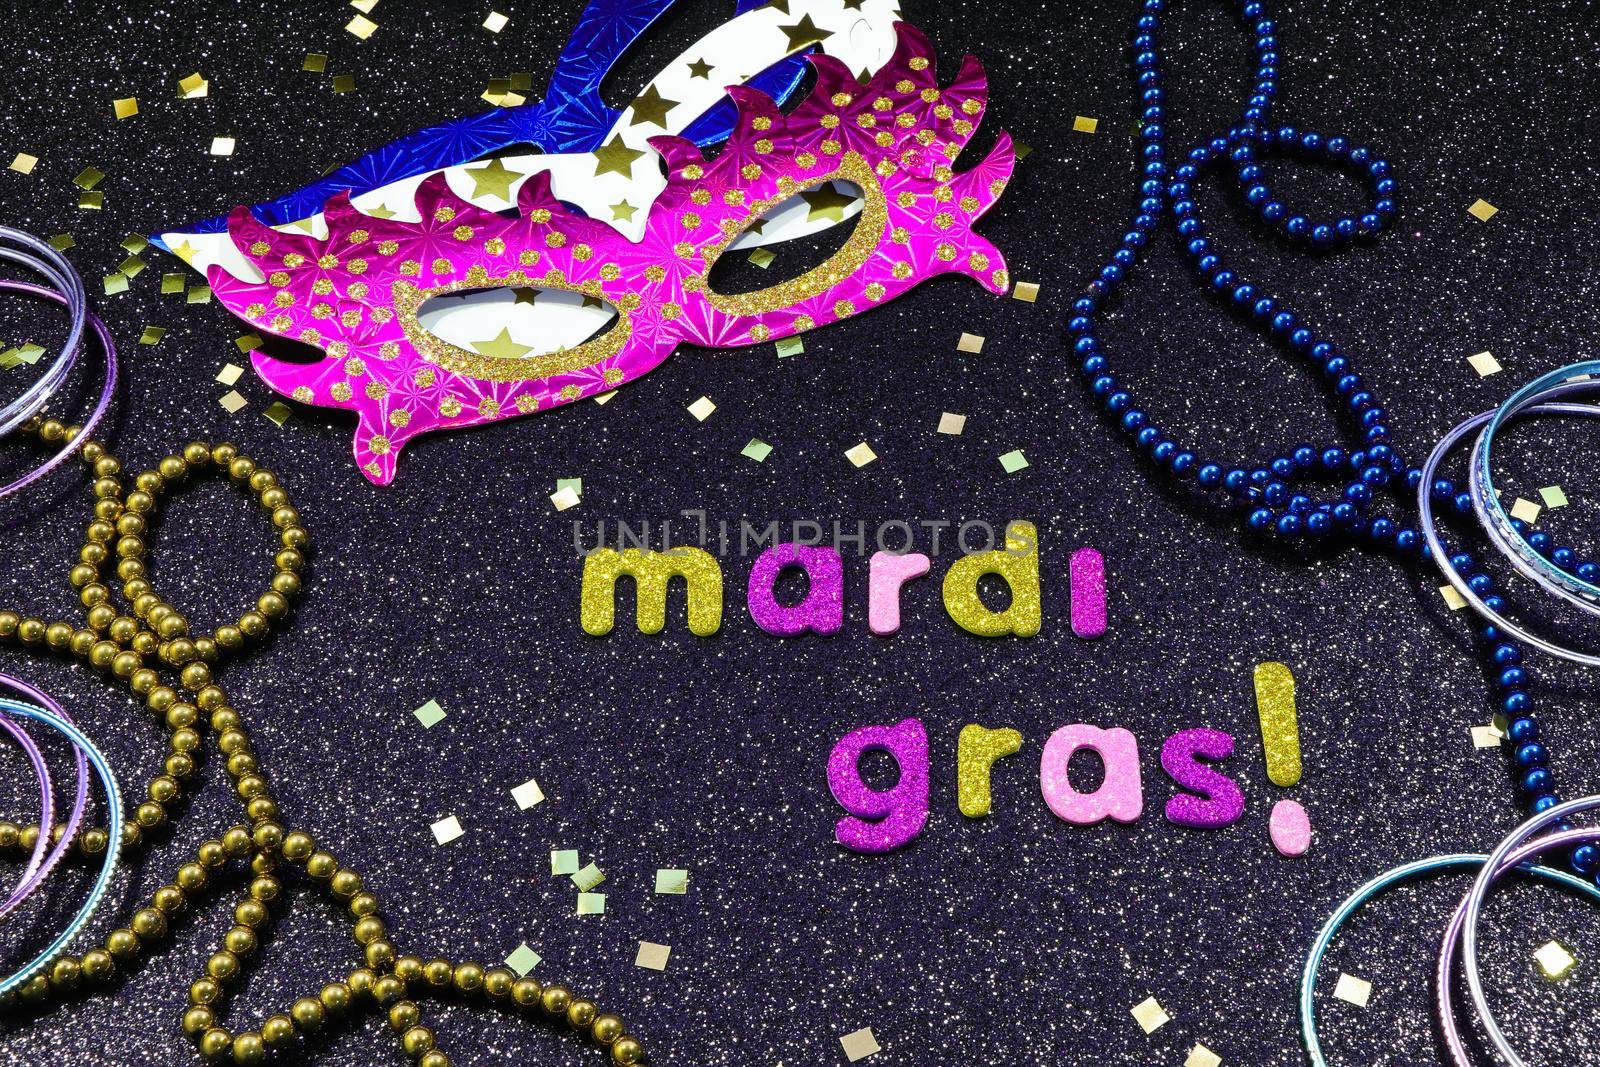 Mardi Gras Party Masks With Jewelry And Confetti by jjvanginkel